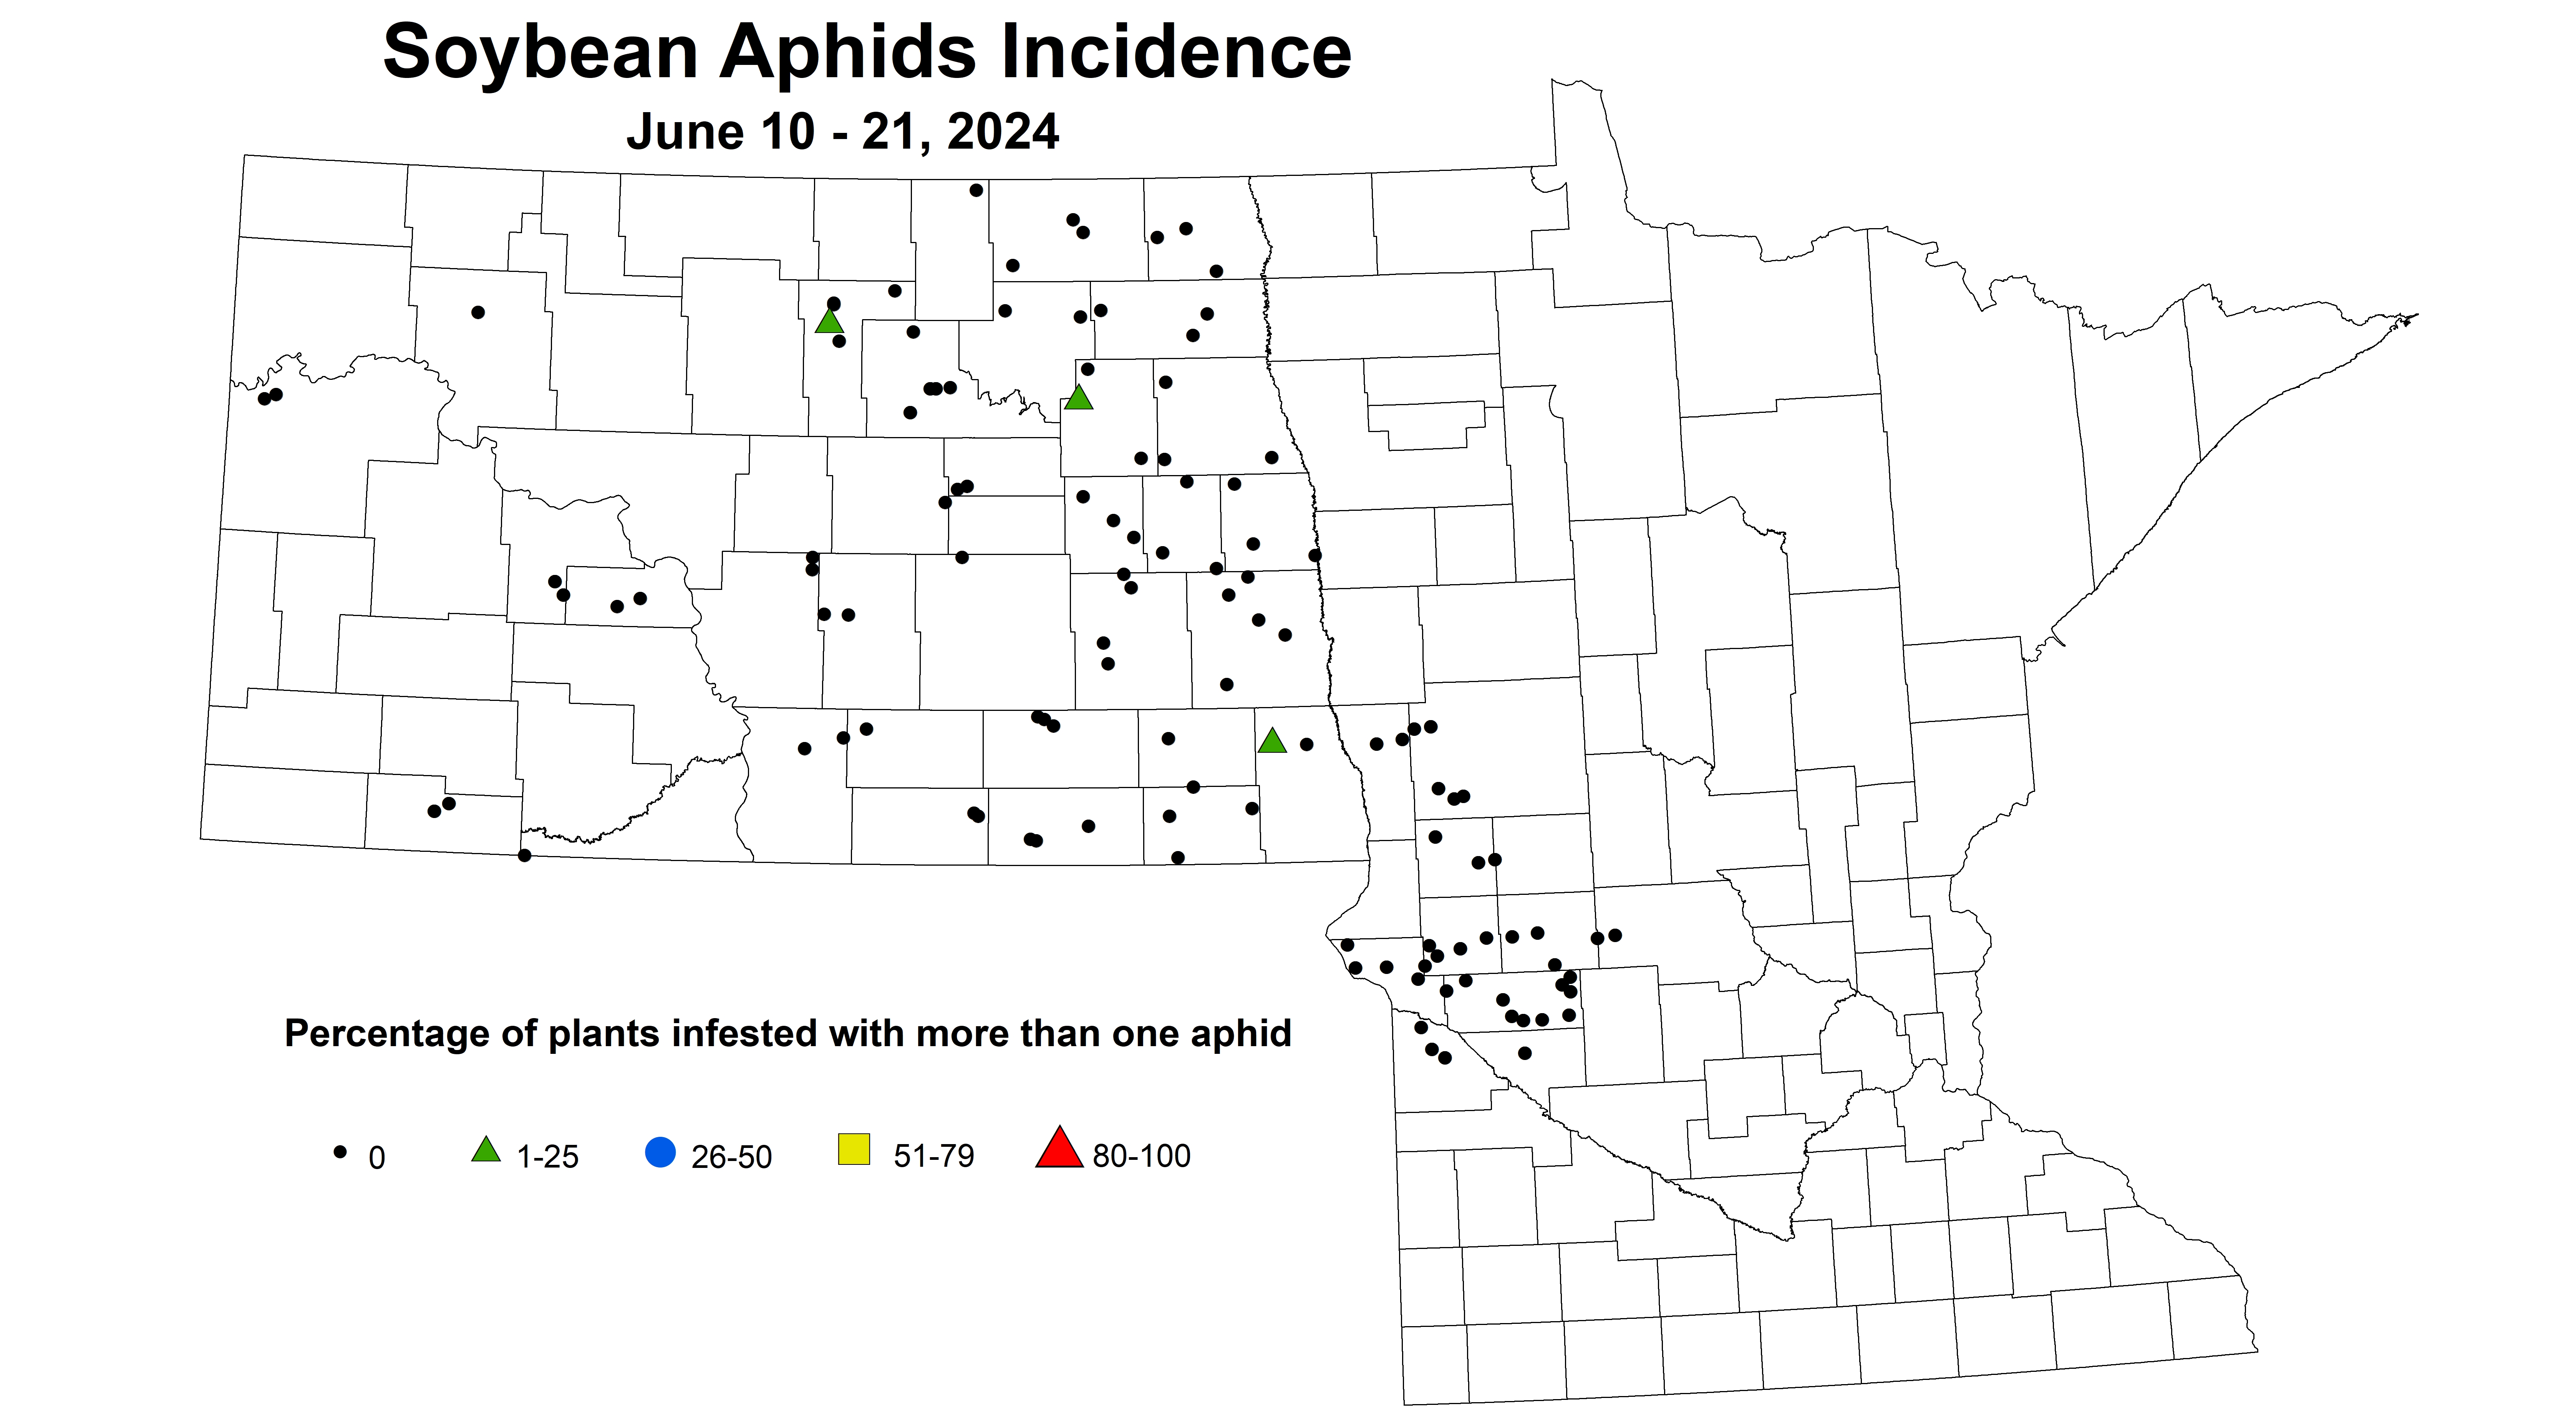 soybean aphid incidence June 10-21 2024